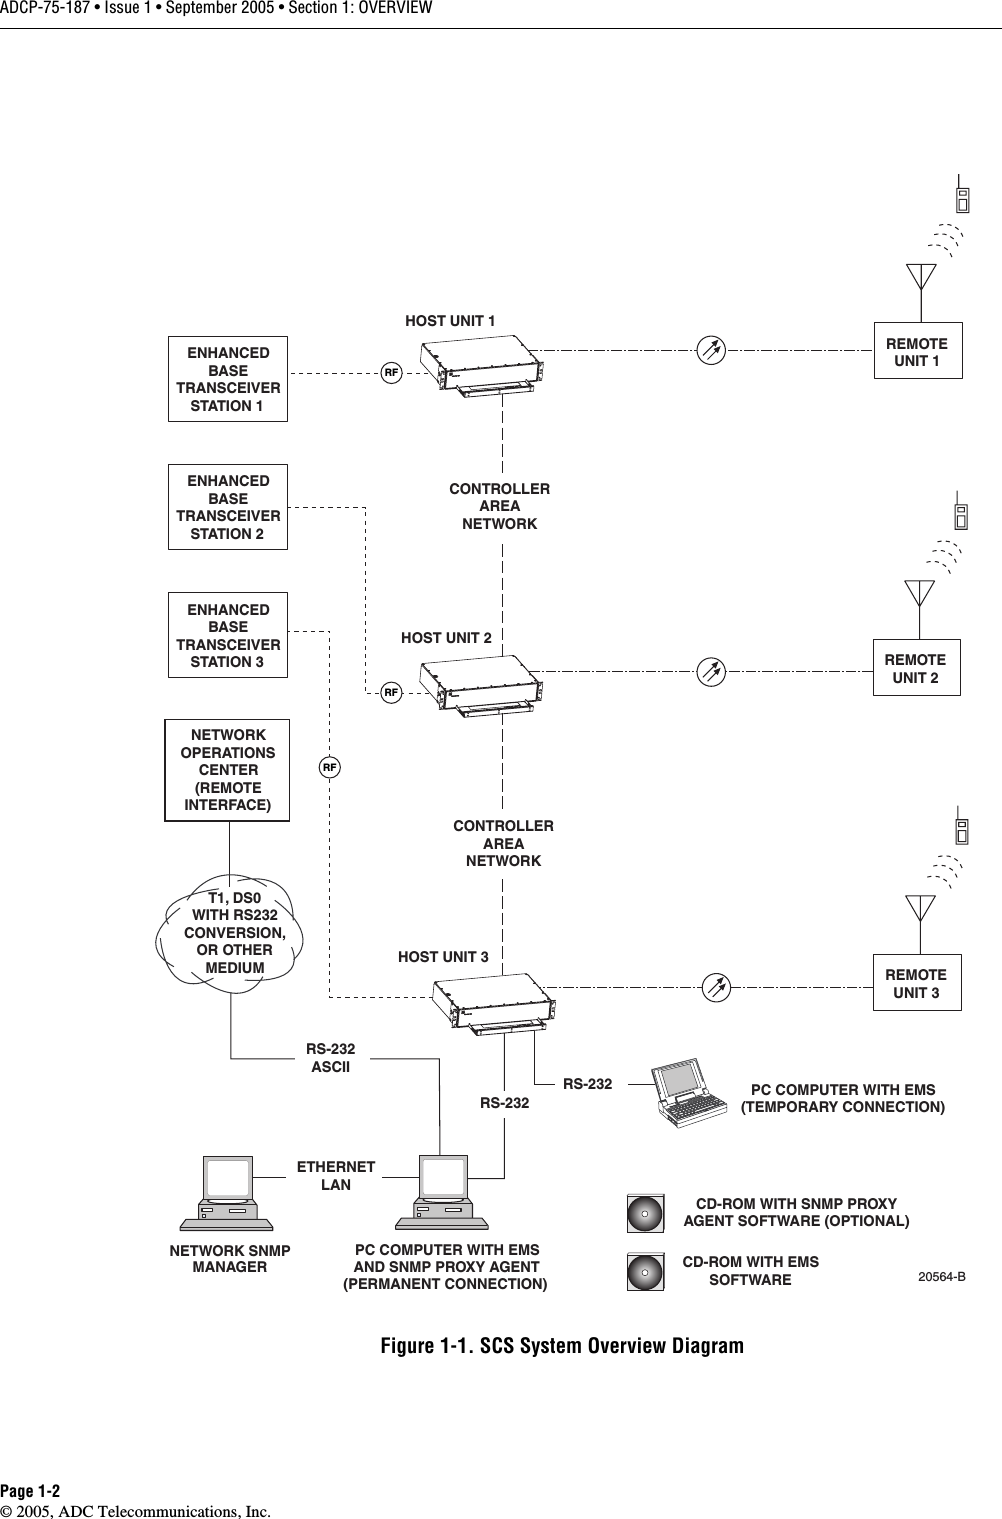 ADCP-75-187 • Issue 1 • September 2005 • Section 1: OVERVIEWPage 1-2© 2005, ADC Telecommunications, Inc.Figure 1-1. SCS System Overview DiagramHOST UNIT 1HOST UNIT 2HOST UNIT 3NETWORKOPERATIONSCENTER(REMOTEINTERFACE)CONTROLLERAREANETWORK20564-BRFRFRFCONTROLLERAREANETWORKREMOTEUNIT 1REMOTEUNIT 3REMOTEUNIT 2PC COMPUTER WITH EMSAND SNMP PROXY AGENT(PERMANENT CONNECTION) RS-232ASCIIRS-232CD-ROM WITH EMSSOFTWARENETWORK SNMPMANAGERCD-ROM WITH SNMP PROXYAGENT SOFTWARE (OPTIONAL)ETHERNETLANPC COMPUTER WITH EMS(TEMPORARY CONNECTION)T1, DS0WITH RS232CONVERSION,OR OTHERMEDIUMRS-232ENHANCEDBASETRANSCEIVERSTATION 1ENHANCEDBASETRANSCEIVERSTATION 2ENHANCEDBASETRANSCEIVERSTATION 3